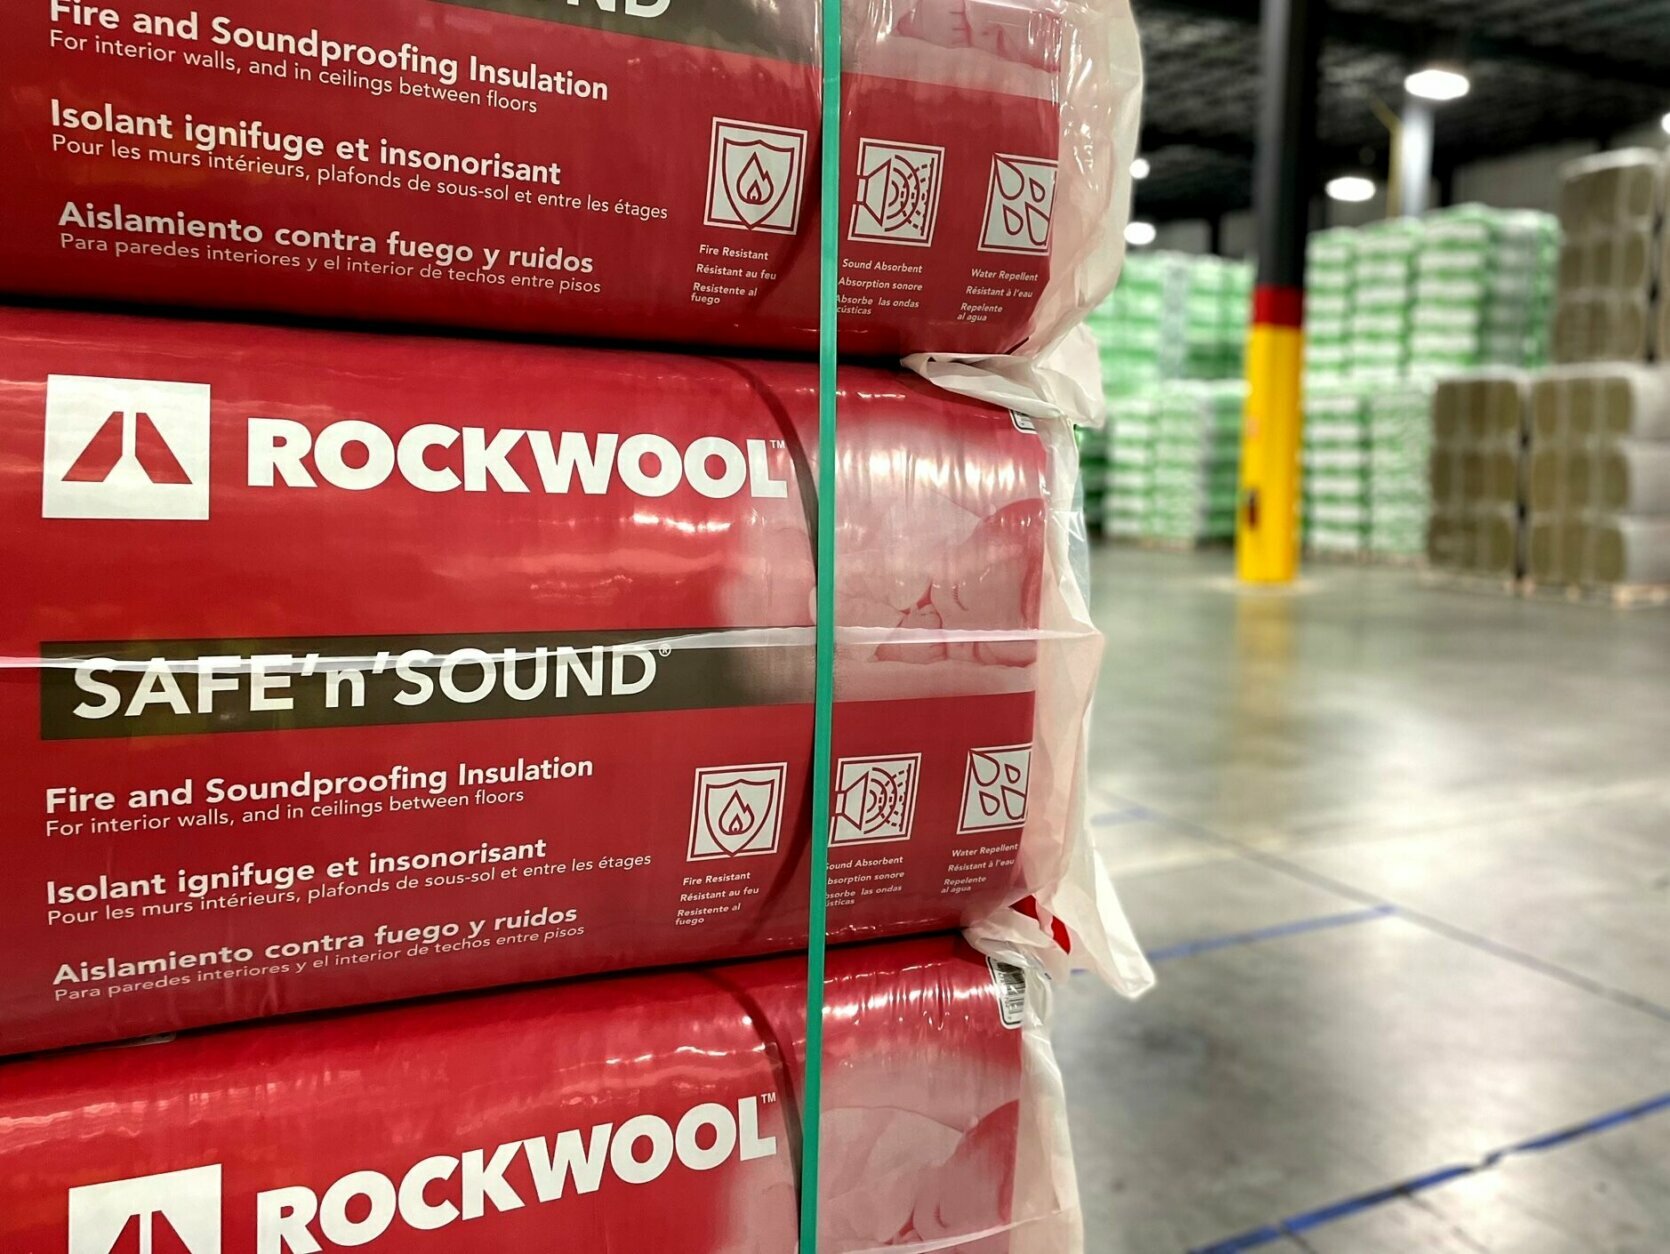 <p>Rockwool paid for installation of two air-monitoring stations at local schools &#8212; North Jefferson Elementary and T.A. Lowery Elementary schools</p>
<p><a href="https://emisapps58.erm.com/jeffersoncounty/index.html" target="_blank" rel="noopener noreferrer">The publicly available air monitoring results</a> from the schools provide hour-by-hour readings of air quality, including measurements of particulate matter, formaldehyde, nitrogen dioxide and sulfur dioxide.</p>
<p>During the WTOP tour of the plant, Thursday, all readings were in the Good category &#8212; the healthiest ranking in the online monitoring dashboard.</p>
<p>A <a href="https://www.rockwool.com/west-virginia/environment/?fbclid=IwAR3b2HGw5e8s47_ubyYyV-9JJzFE-wg1DdM49P7HC6R4z1W1CnTqsRNIwUQ#HHRA" target="_blank" rel="noopener noreferrer">human health risk assessment</a> conducted for Rockwool by CTEH, an environmental consulting firm, in March 2020 found no discernible harm to human health.</p>
<p>“The ‘hazard index’ in relation to the Rockwool facility is more than 30 times lower<b> </b>than the level that would pose any potential risk to human health,” the report concluded. “The cancer risk for students attending the assessed schools in succession is estimated to be approximately 10 times lower than the EPA’s most protective risk threshold of one in one million.”</p>
<p>Espinosa says Rockwool &#8220;appreciates and recognizes&#8221; that there has been opposition to the factory.</p>
<p>&#8220;Our approach has been to be very transparent, not only during the construction phase but, now that we are beginning our startup operation, to help the community understand what they can expect to see here,&#8221; Espinosa said.</p>
<p>&nbsp;</p>
